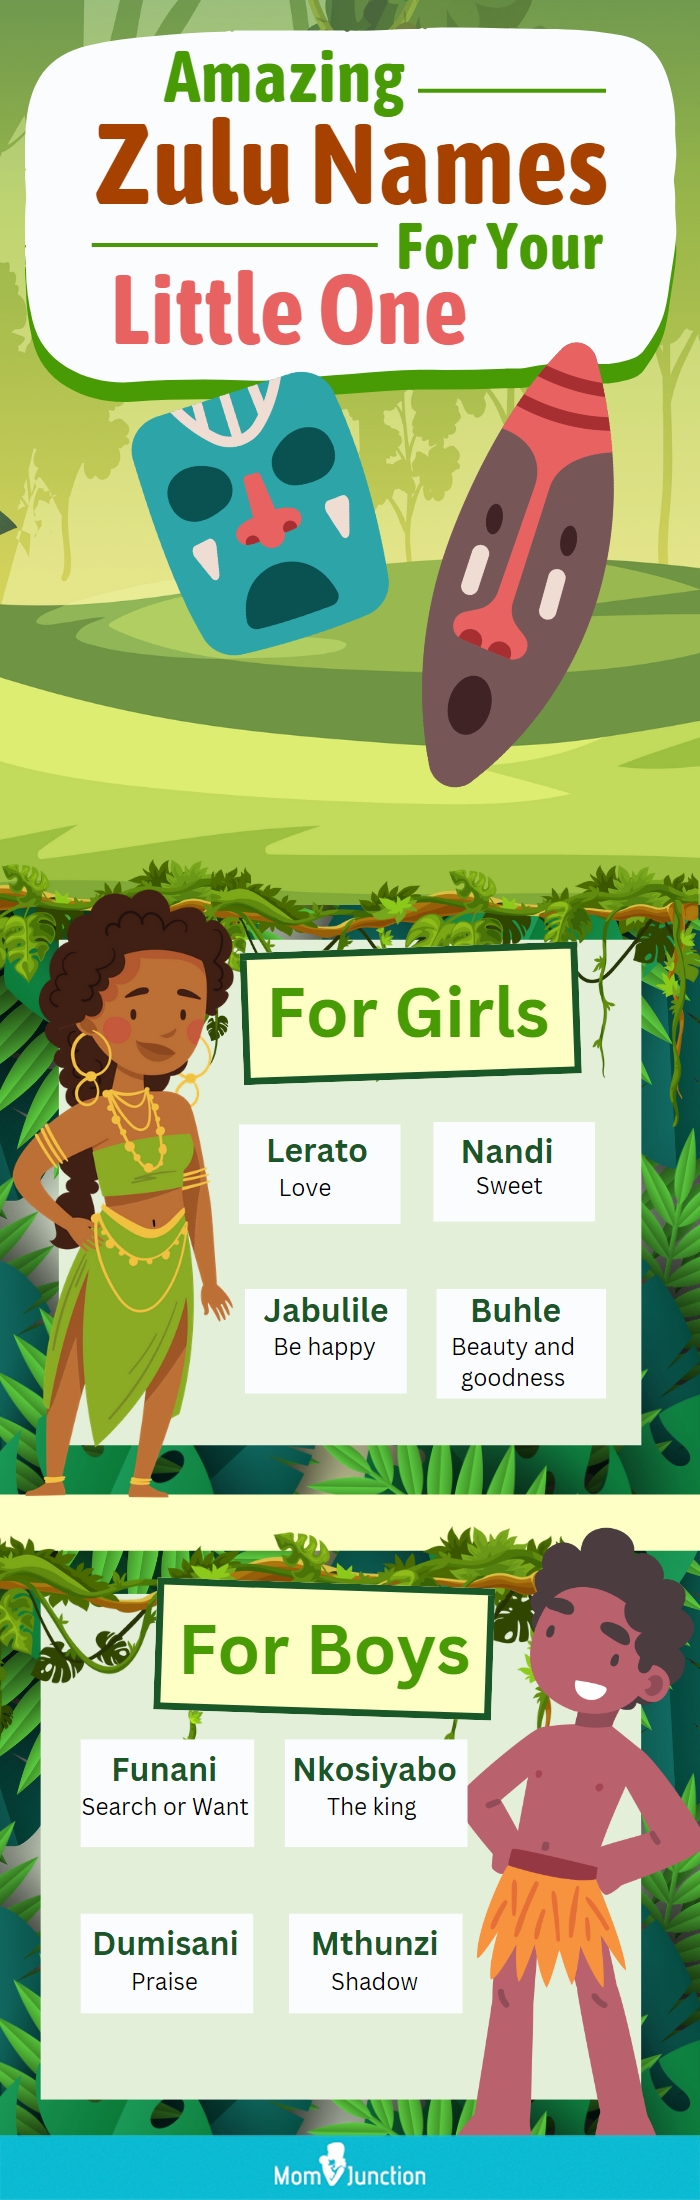 amazing zulu names for your little one